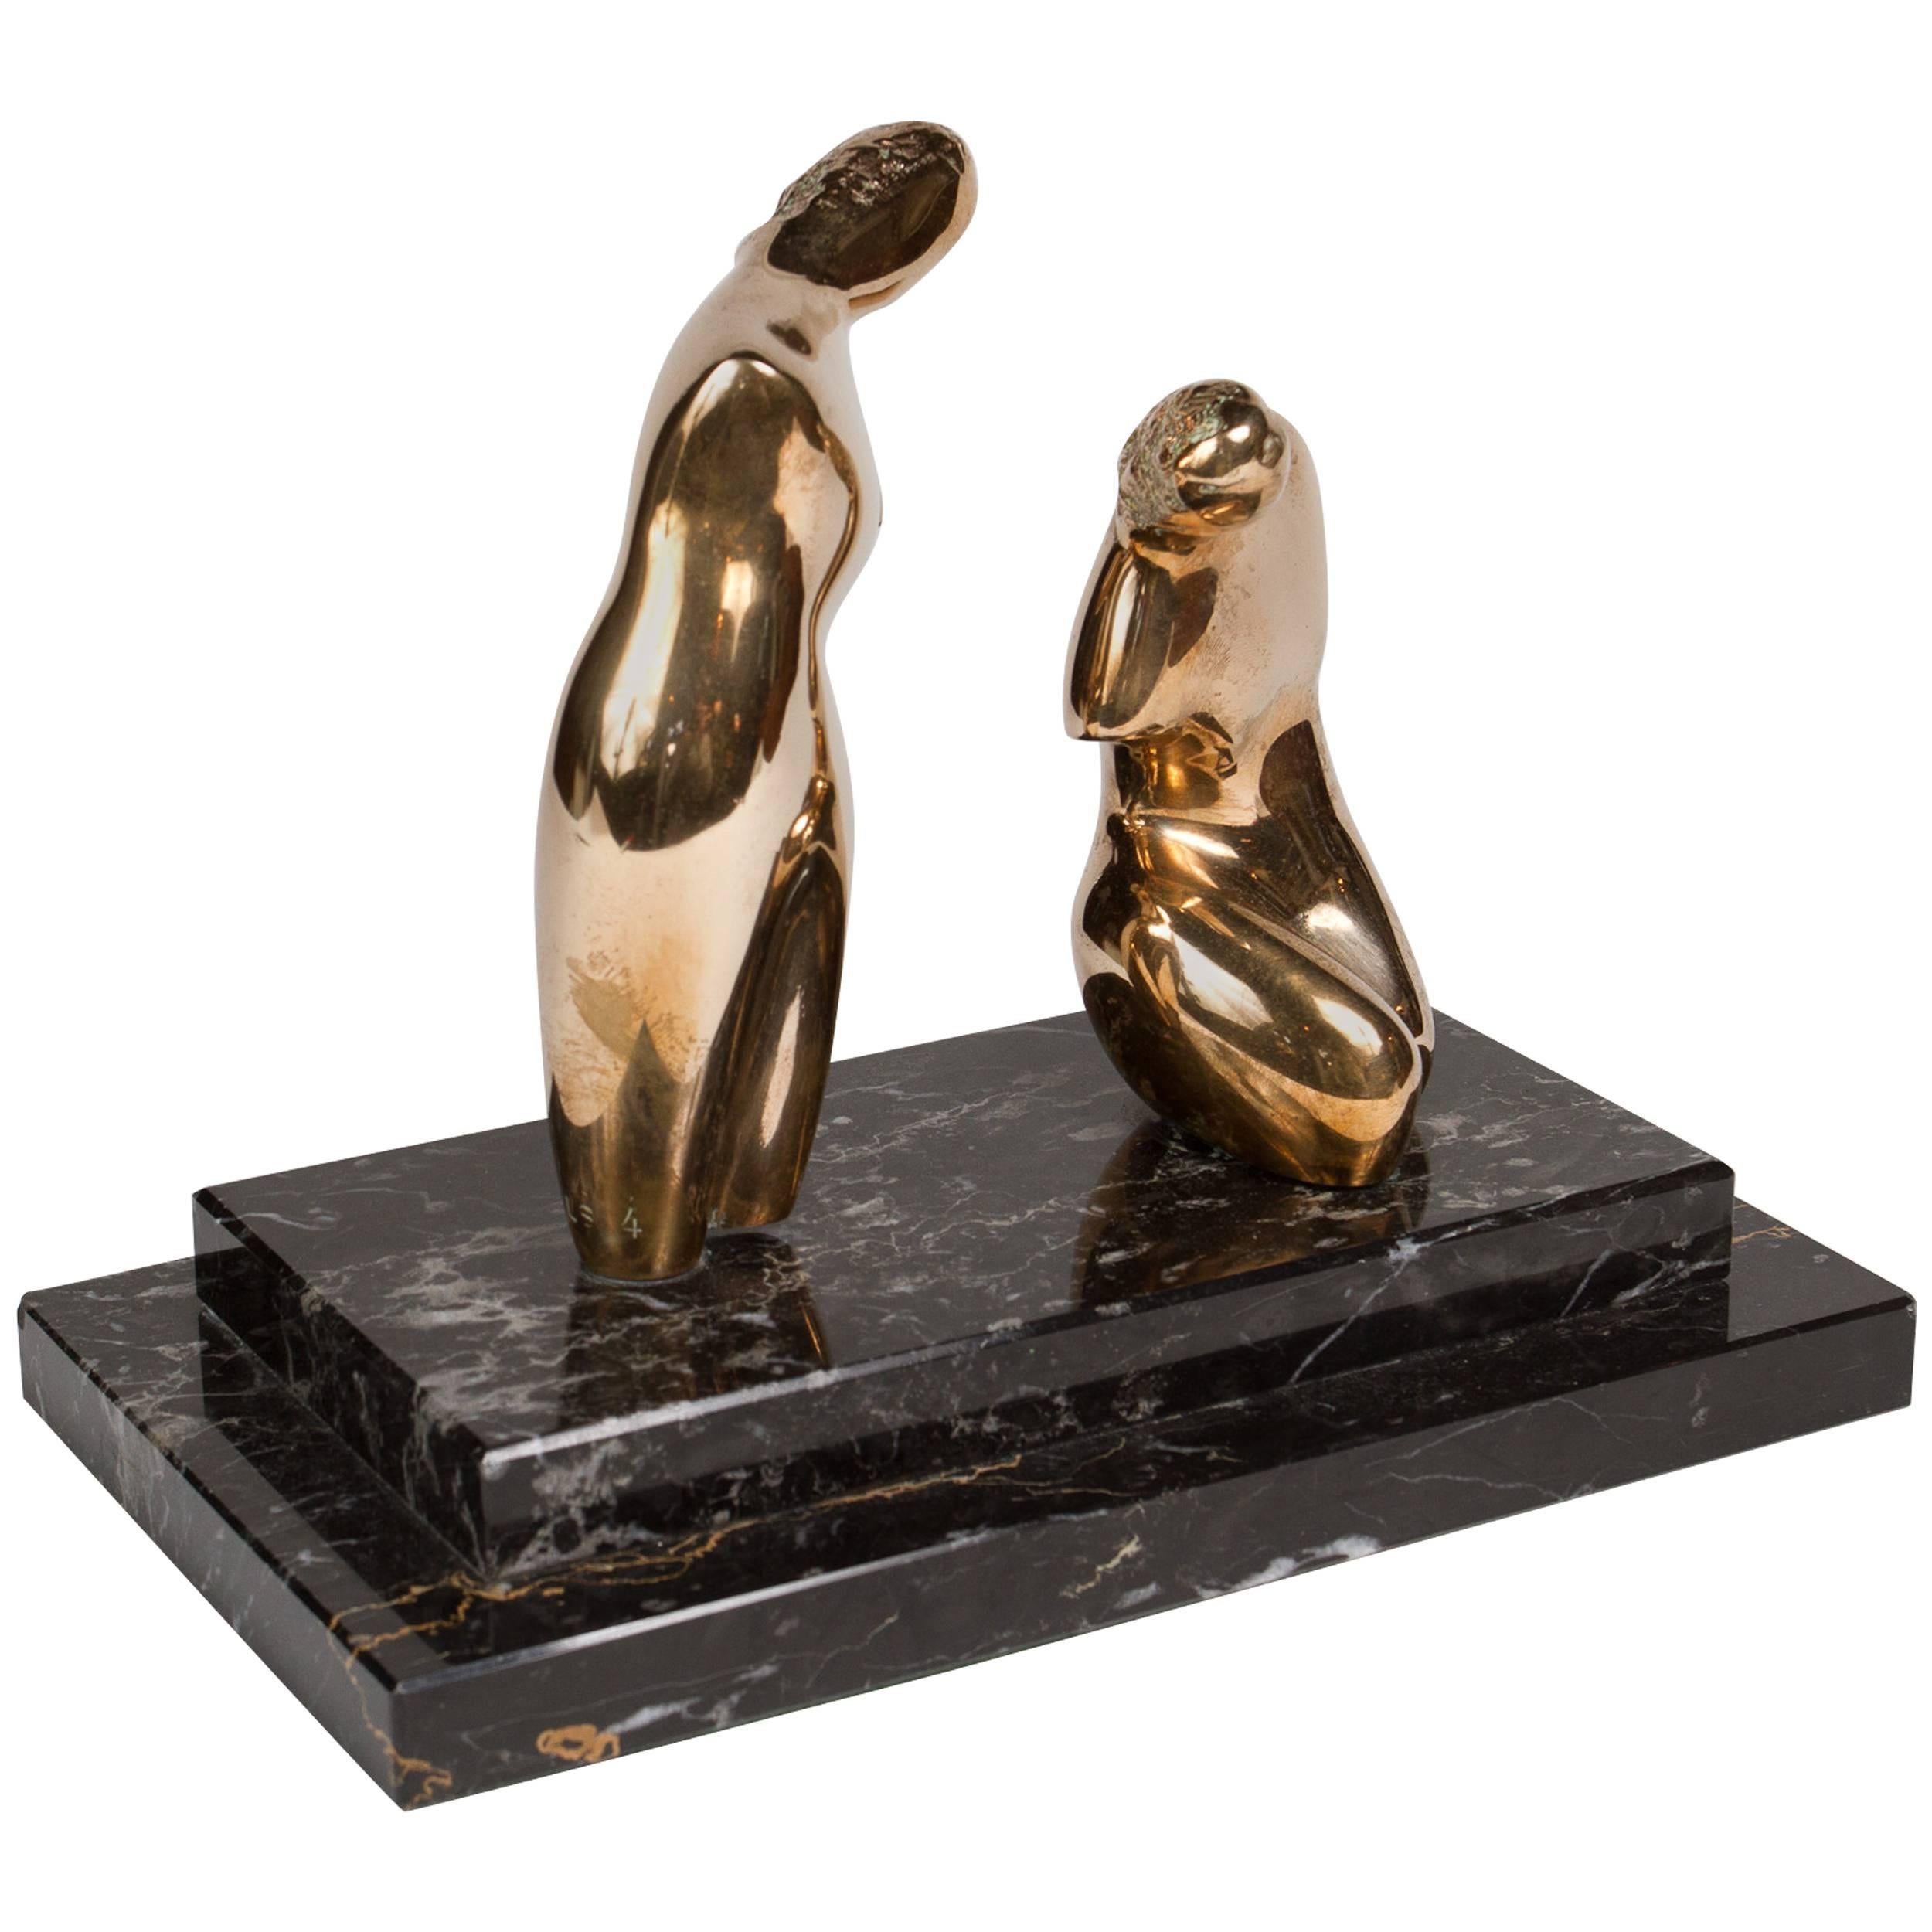 Polished Bronze Abstract Sculpture of Two Woman